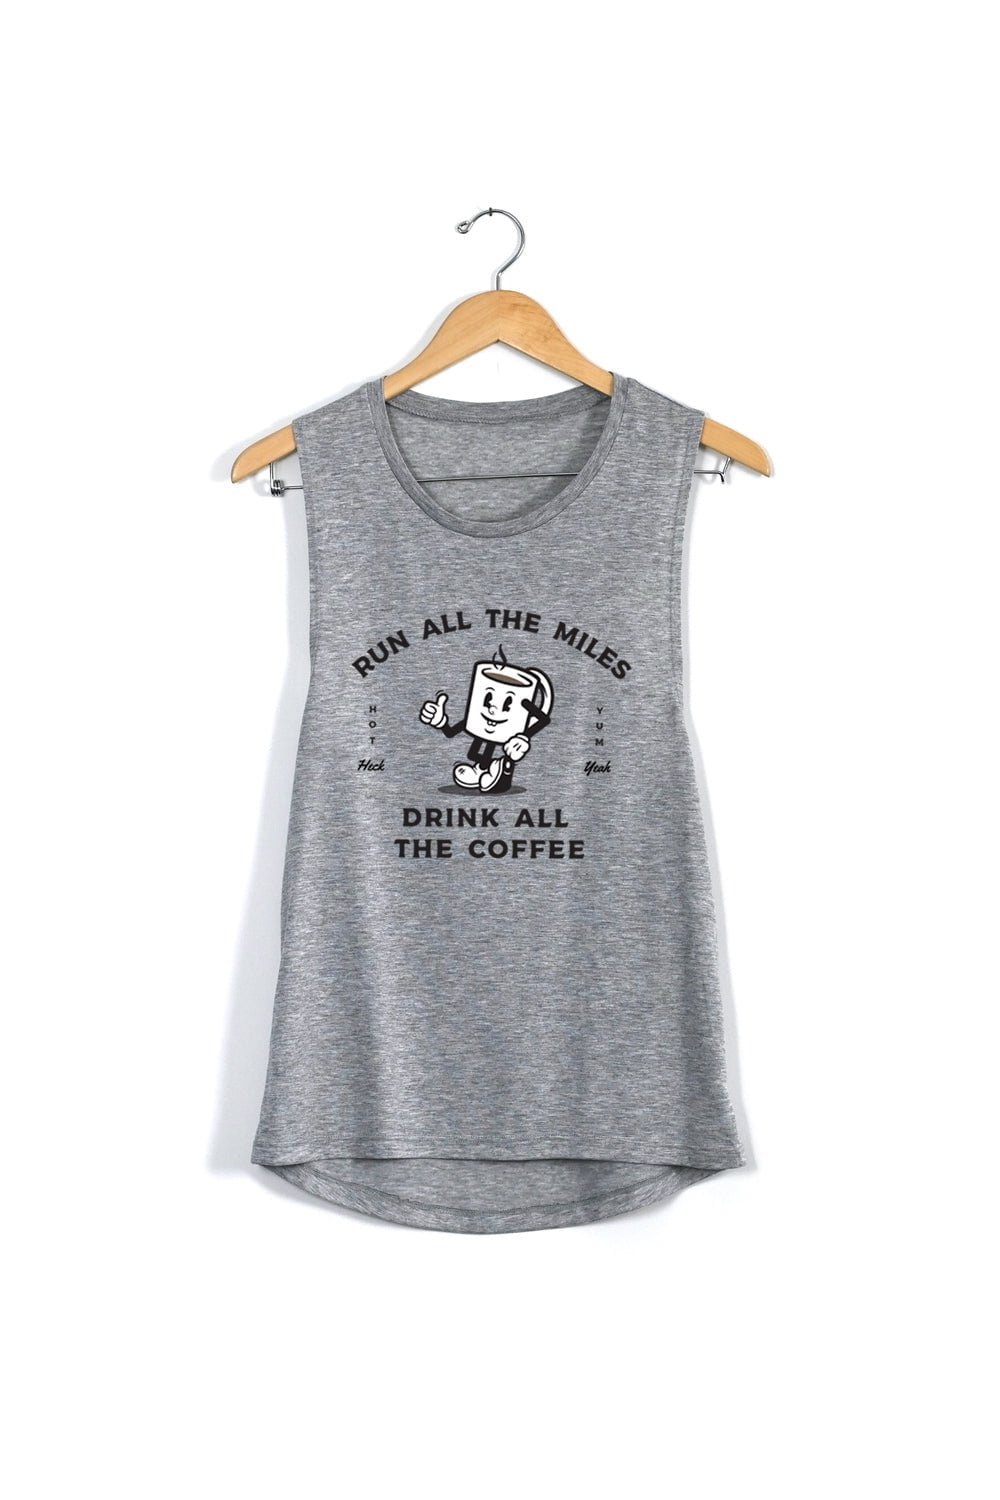 Sarah Marie Design Studio Small / Grey Run All The Miles, Drink All The Coffee Muscle Tank